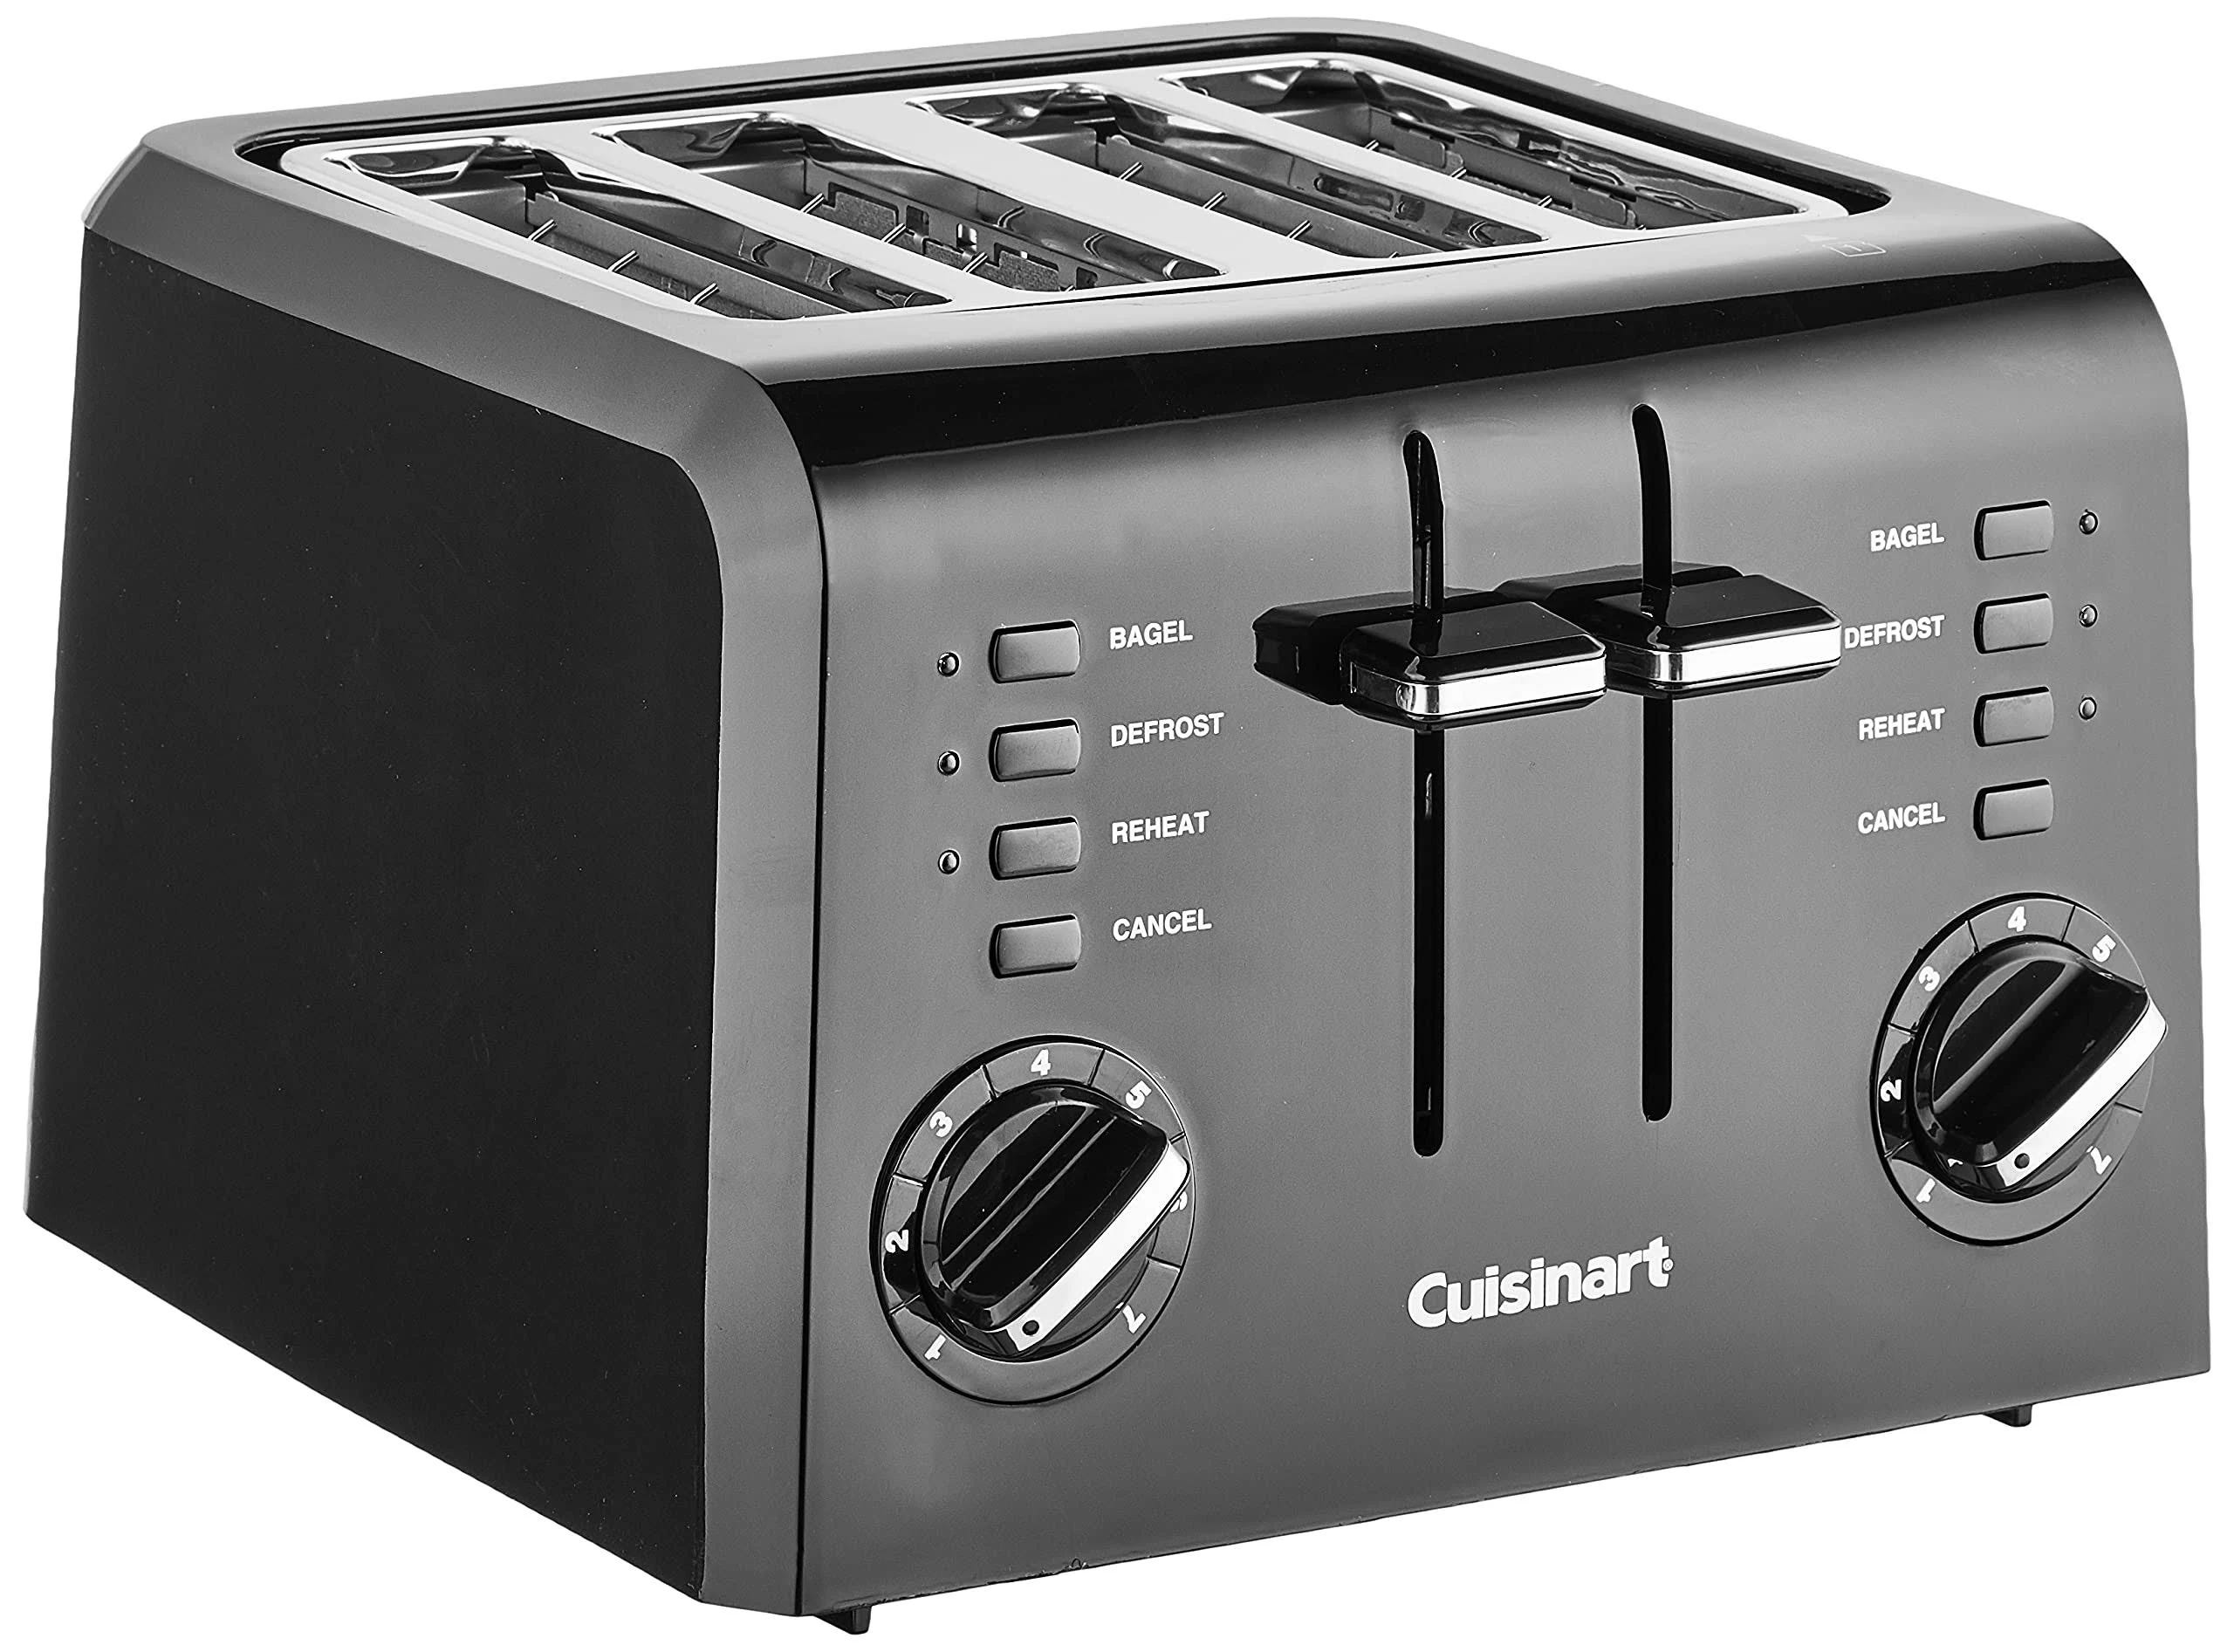 Cuisinart Compact 4-Slice Toaster with Multiple Functions and Shade Control | Image